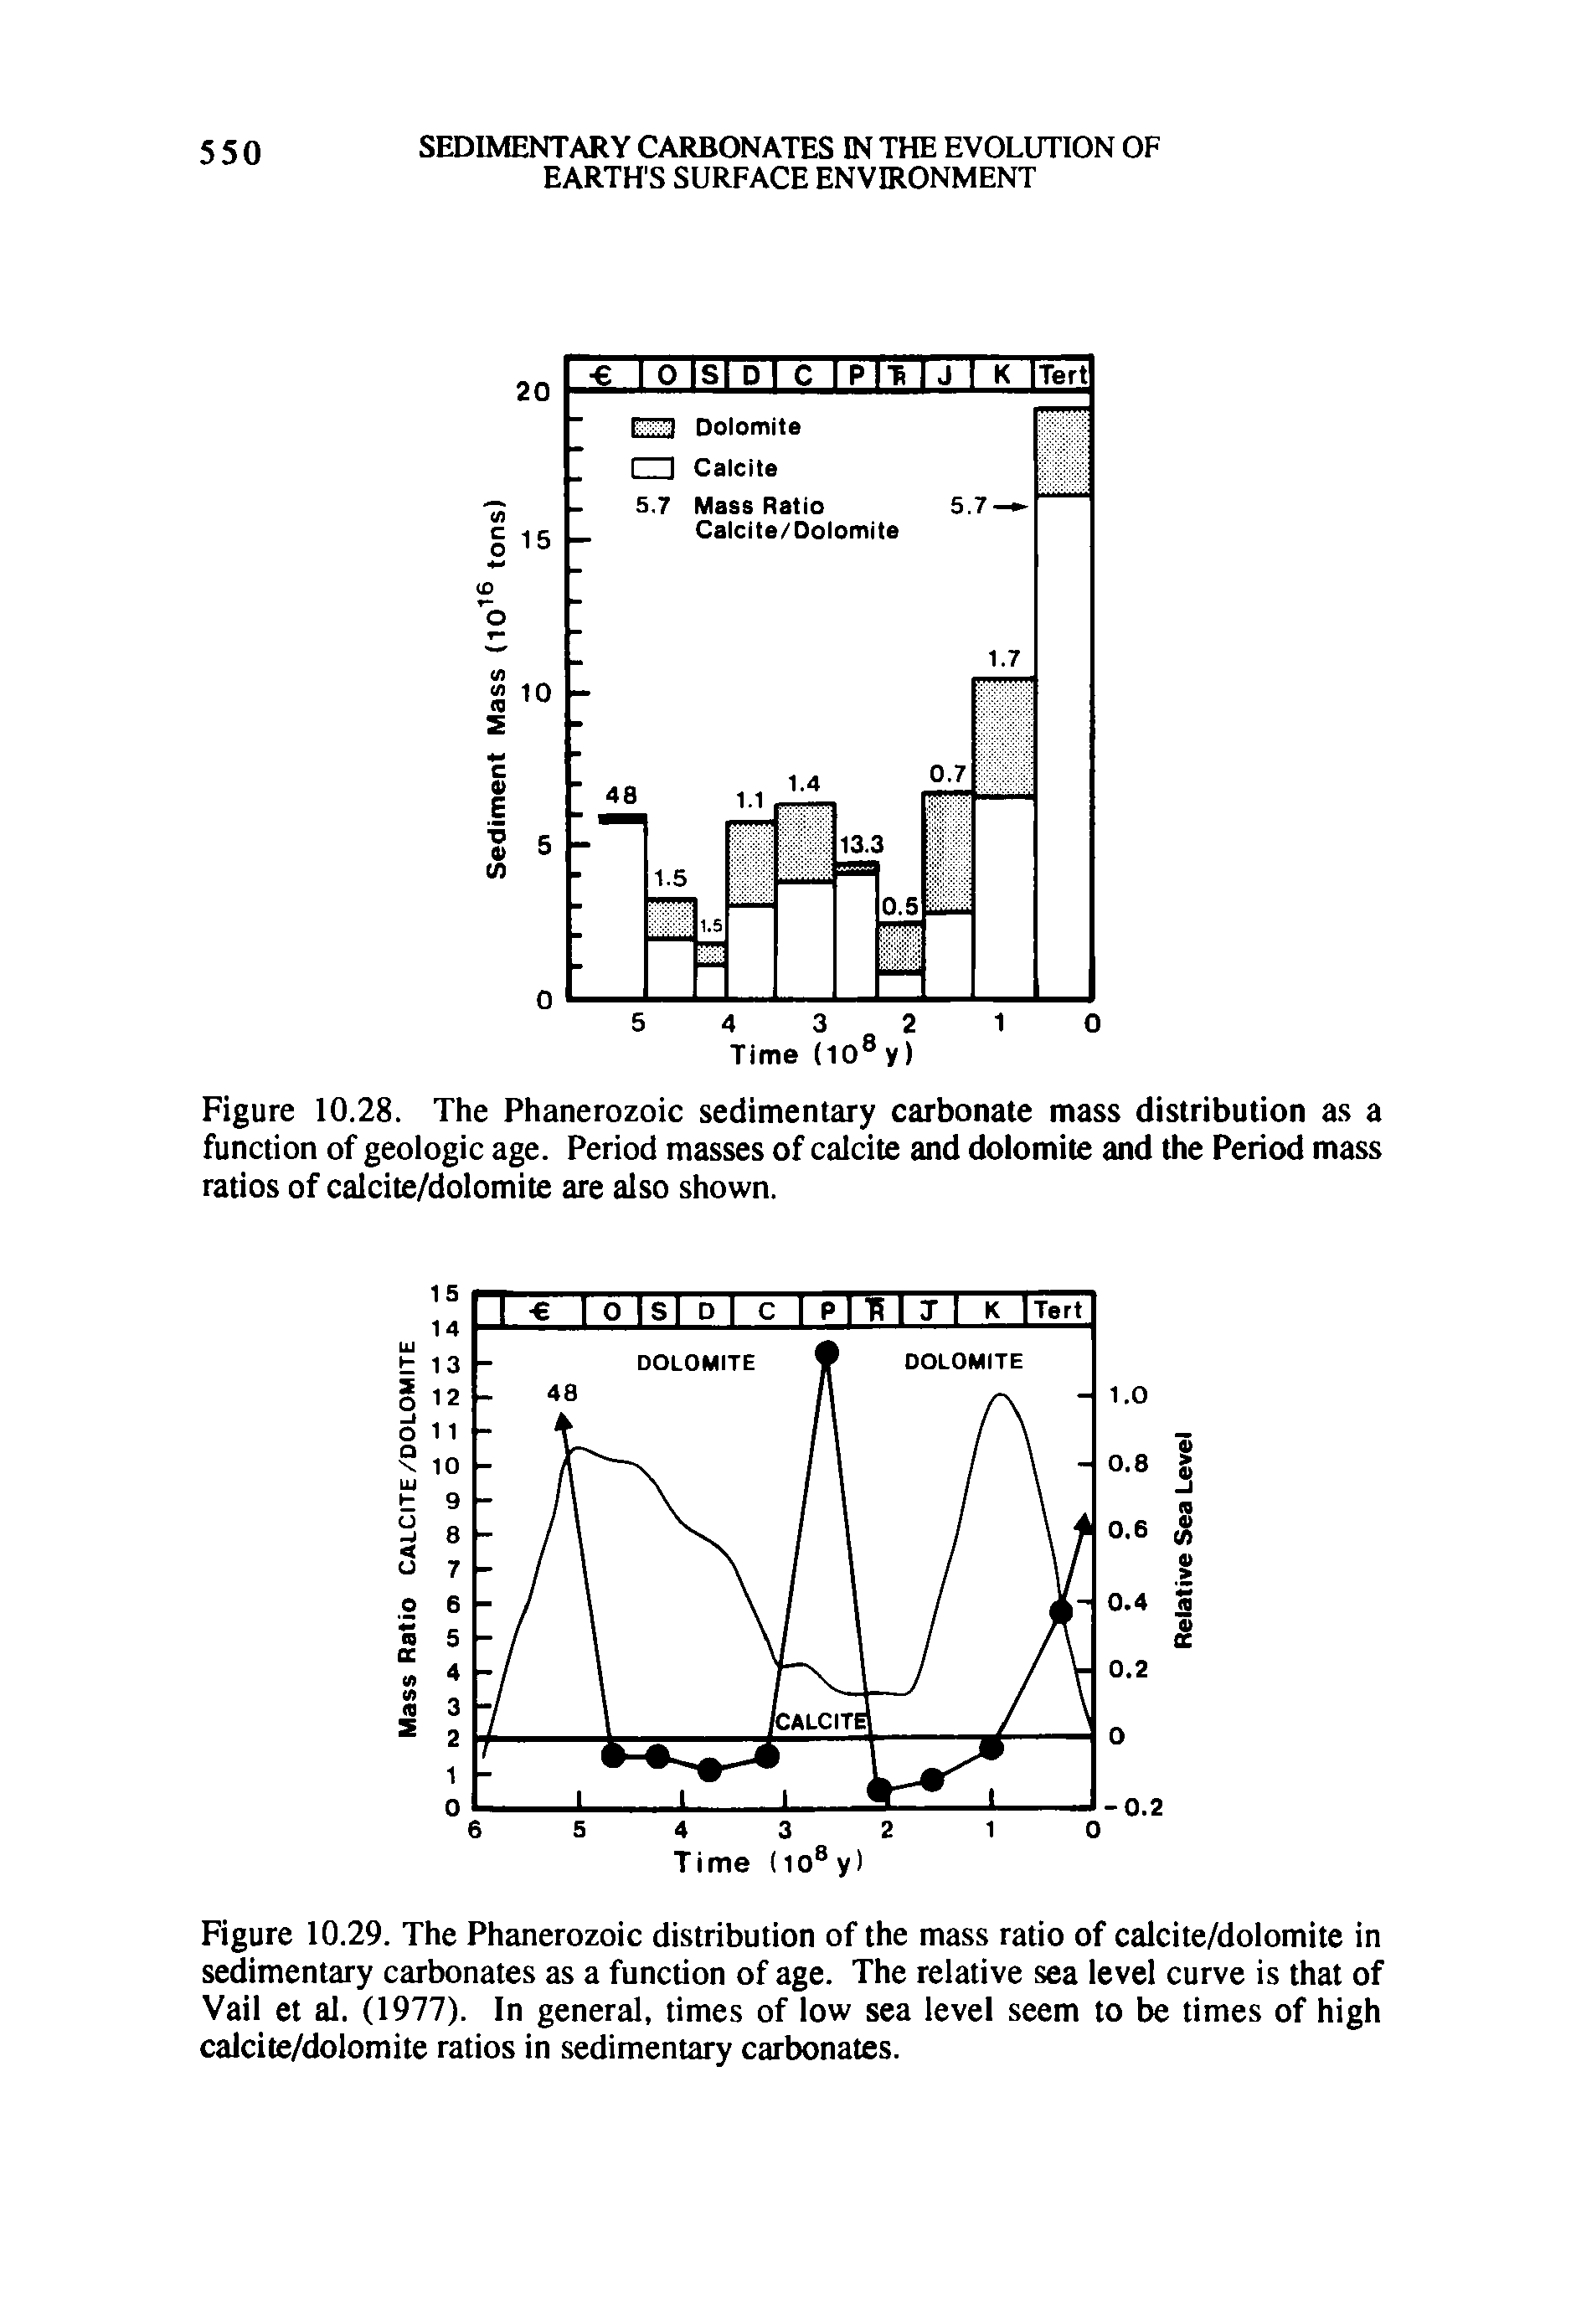 Figure 10.29. The Phanerozoic distribution of the mass ratio of calcite/dolomite in sedimentary carbonates as a function of age. The relative sea level curve is that of Vail et al. (1977). In general, times of low sea level seem to be times of high calcite/dolomite ratios in sedimentary carbonates.